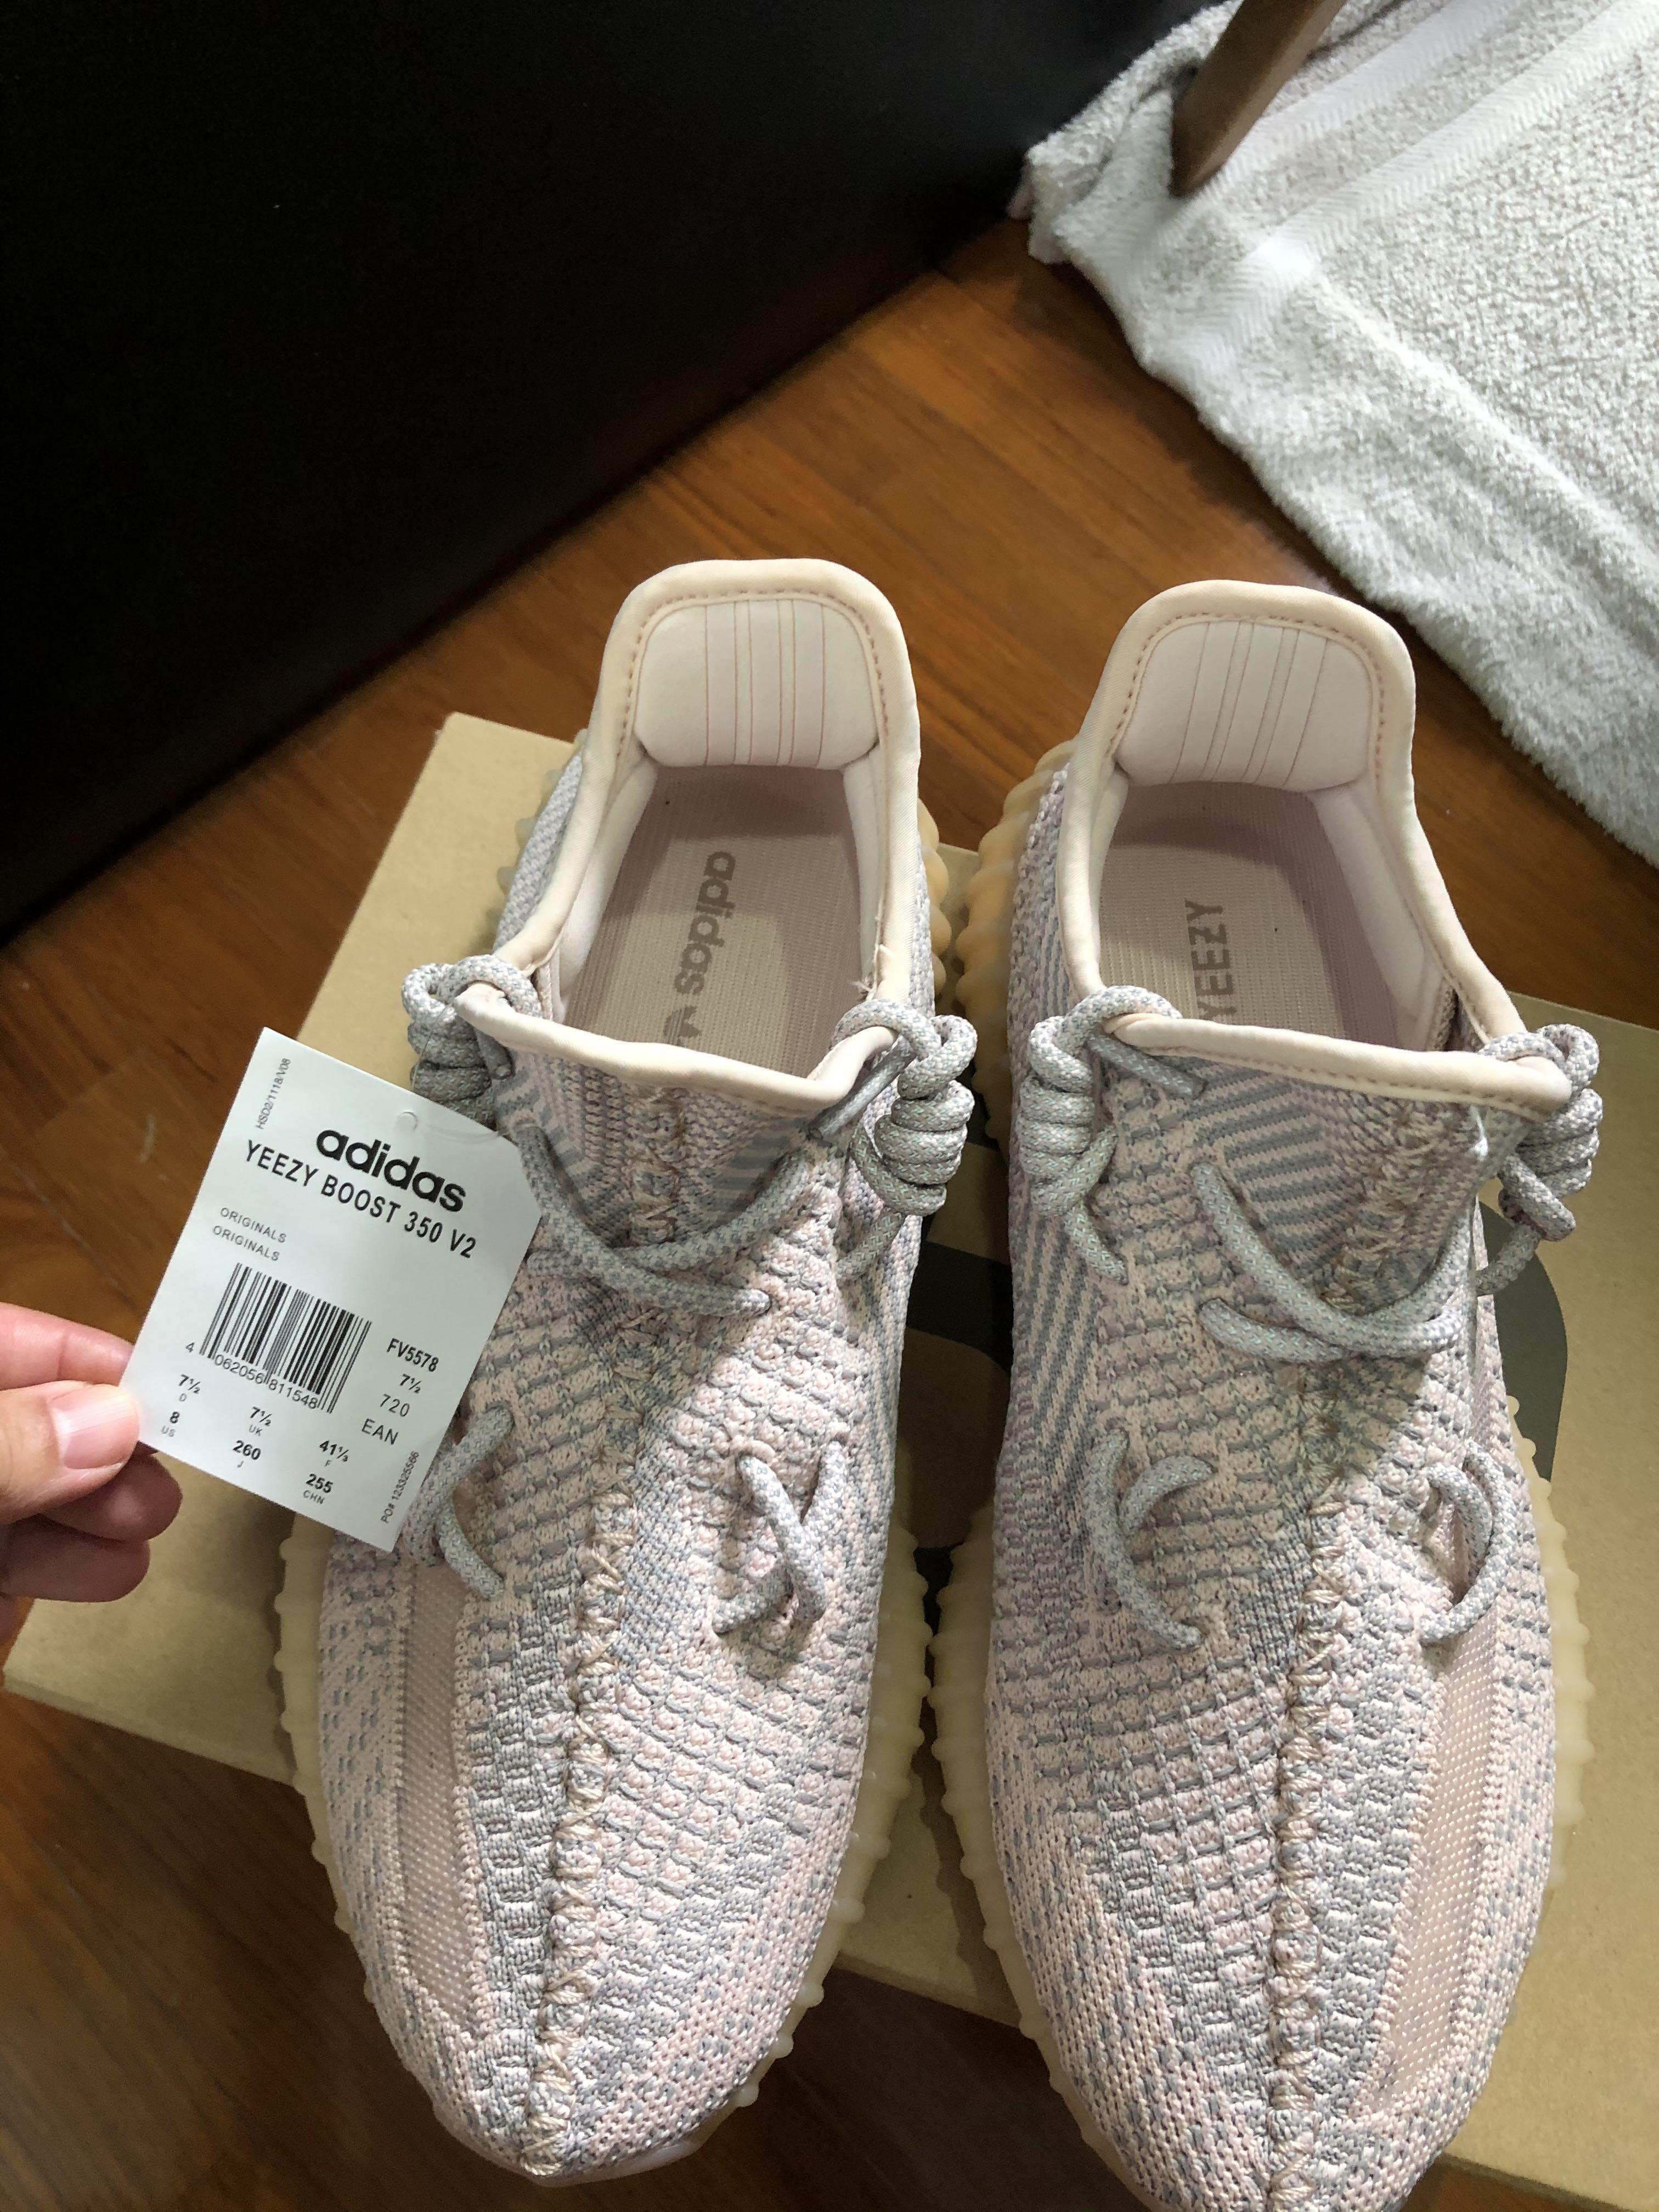 Yeezy synth 350v2(box with tag) slightly negotiable